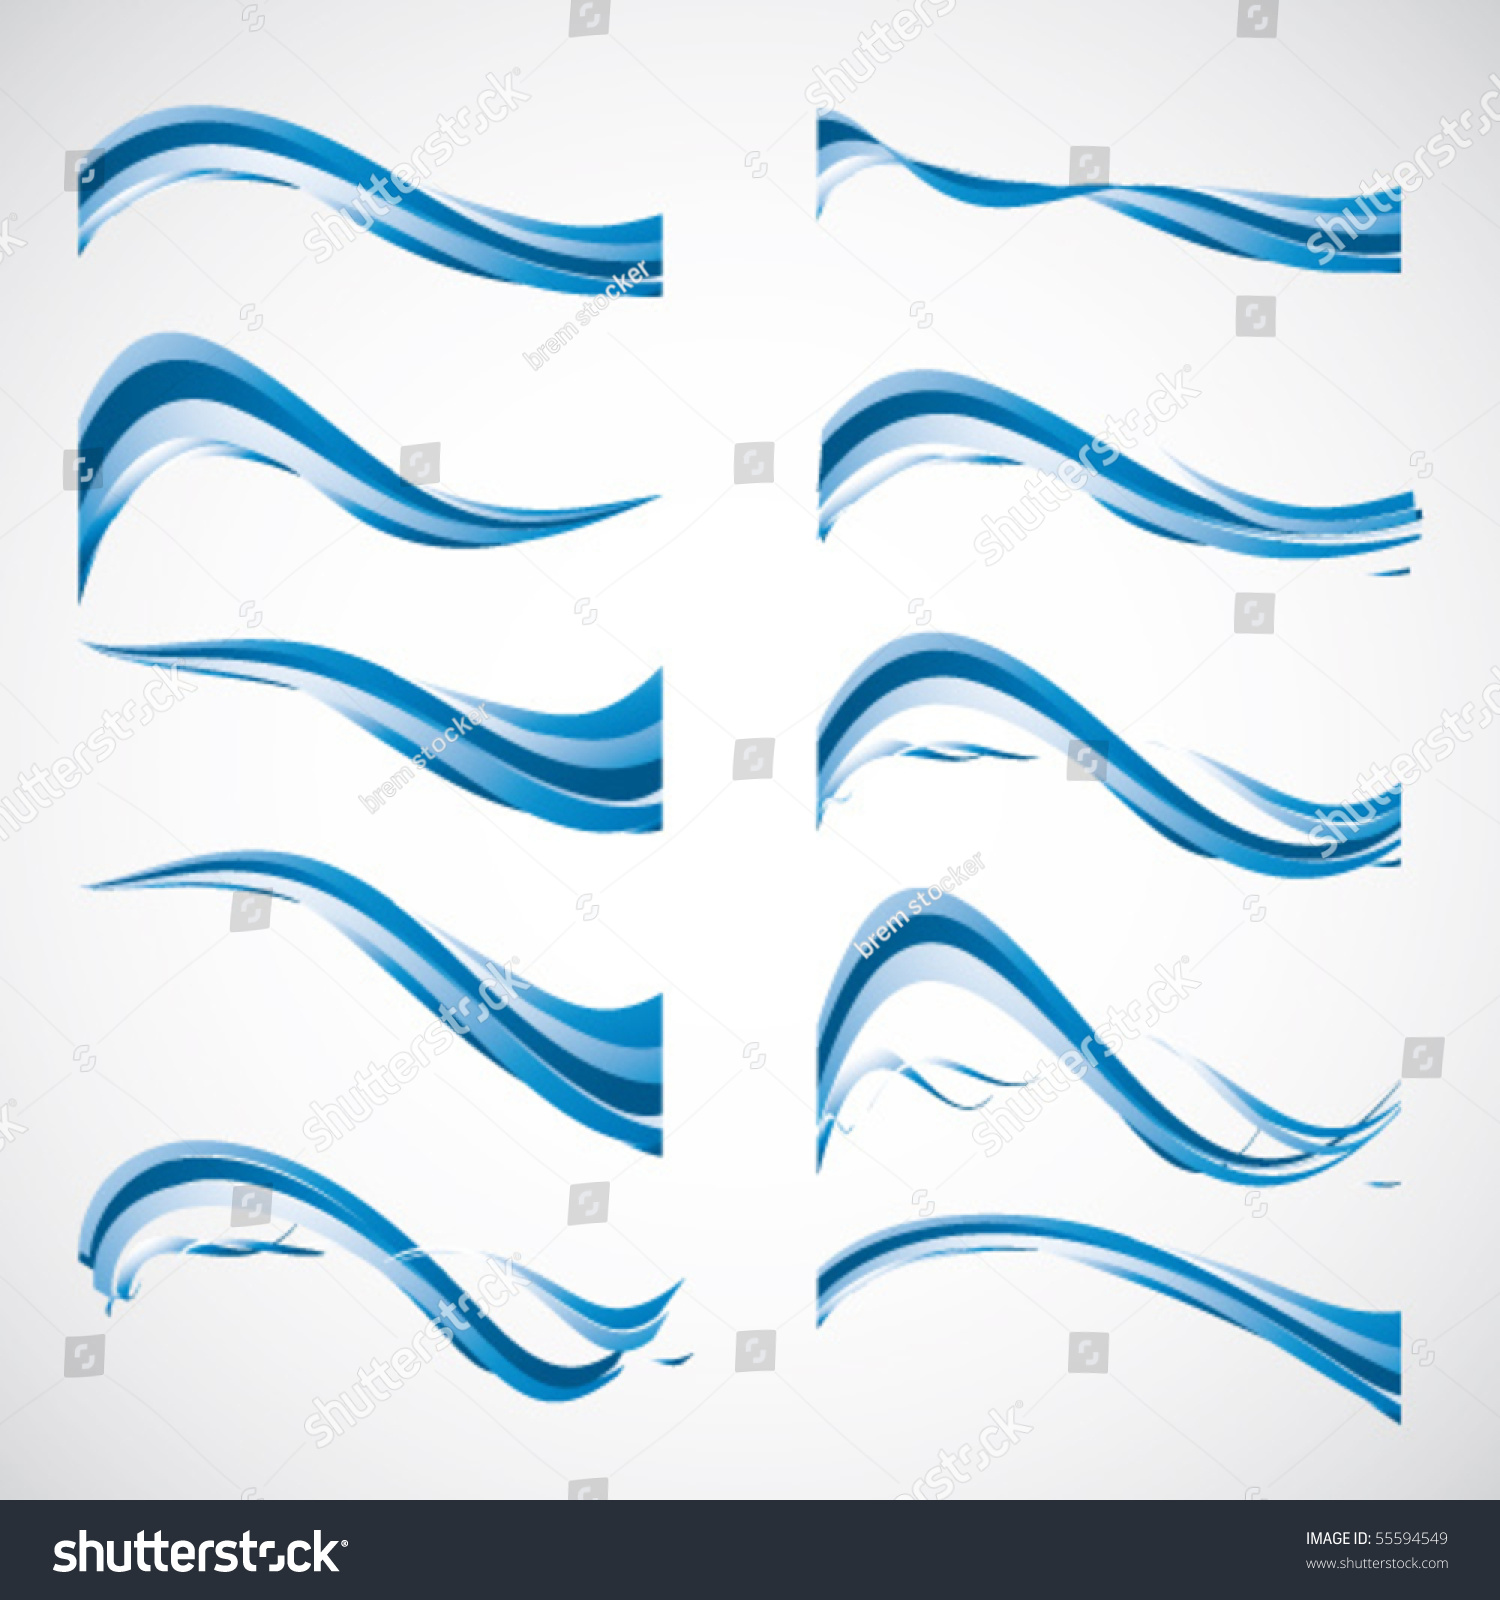 Waves Stock Vector (Royalty Free) 55594549 - Shutterstock